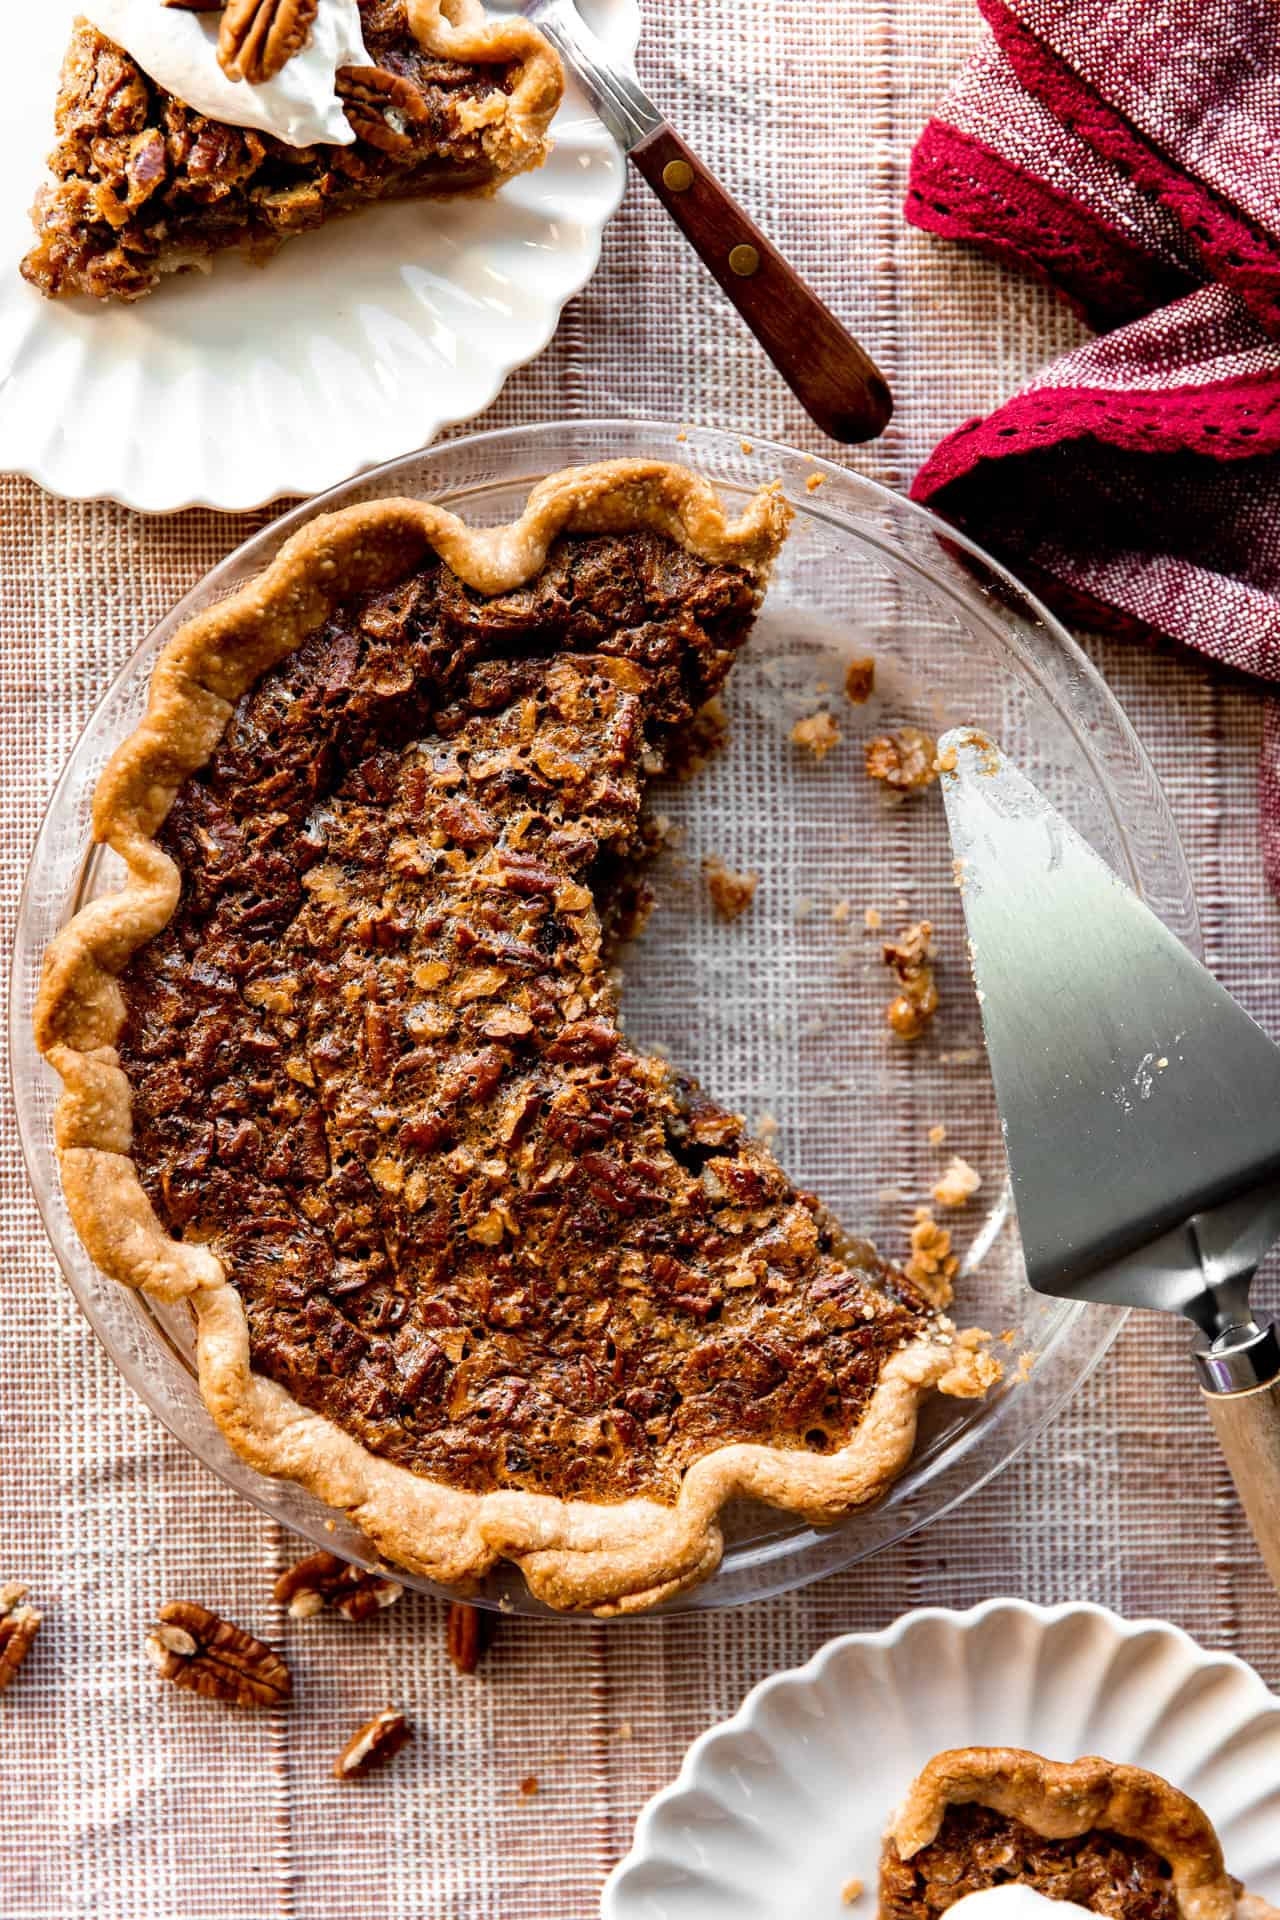 Baked pecan pie in a glass dish with slices removed and a pie server.